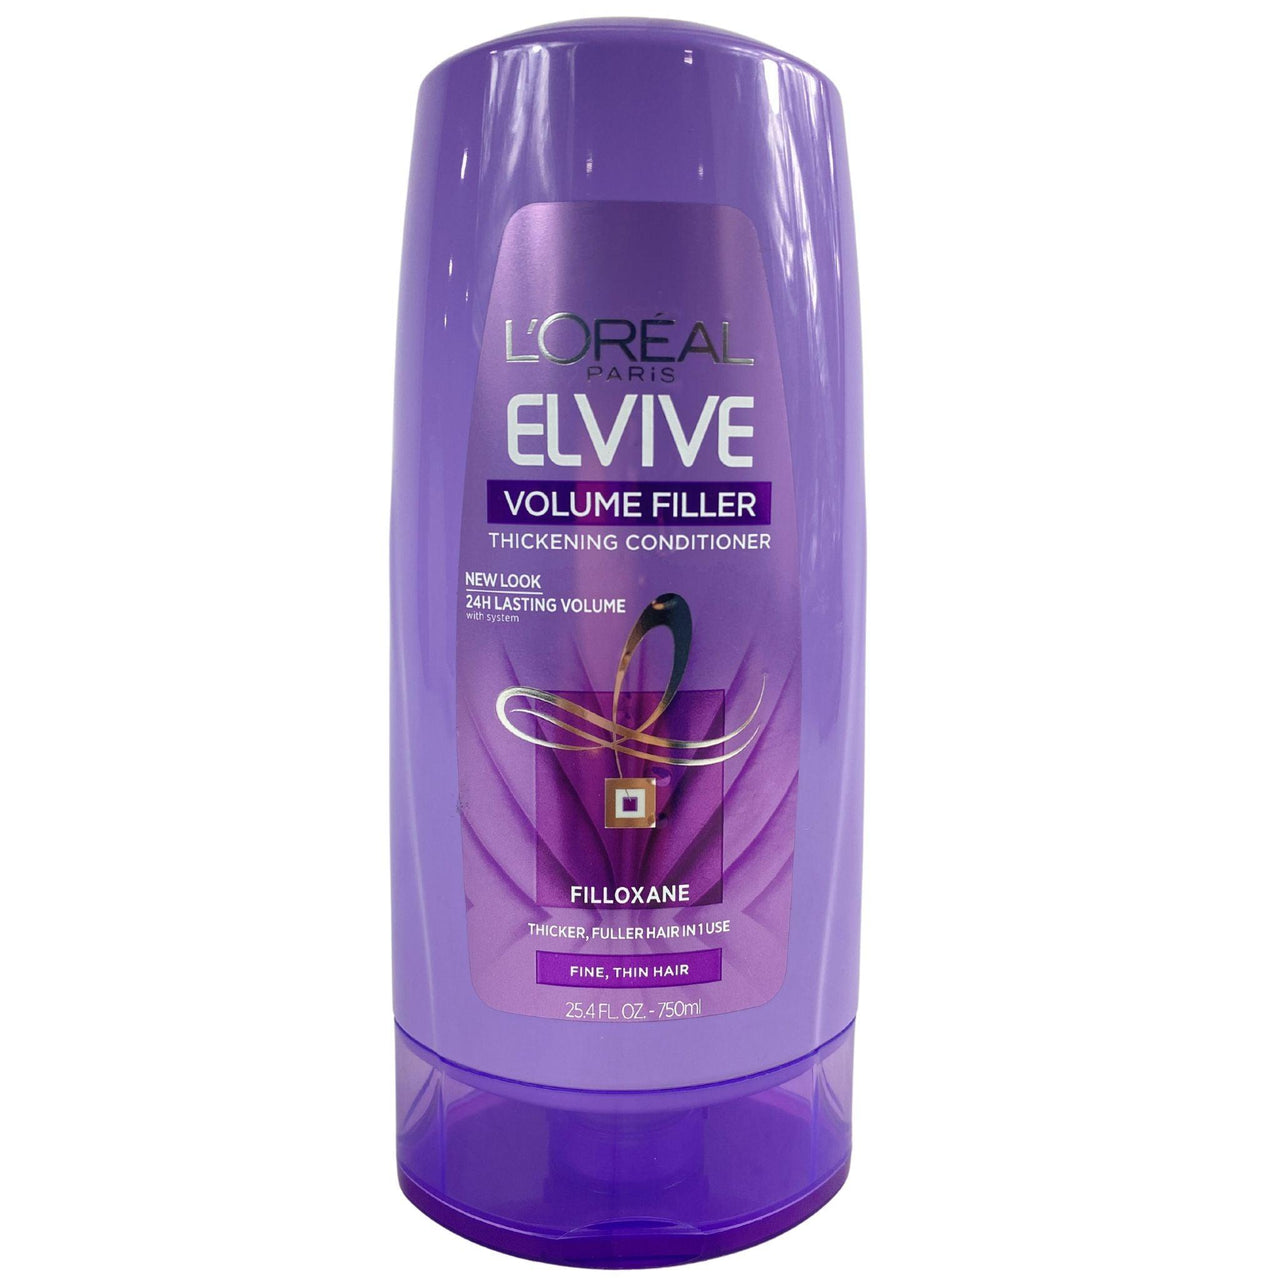 L'Oreal Paris Elvive Volume Filler Thickening Conditioner Filloxane Thicker Fuller Hair in 1 use 25.4FL.OZ (40 Pcs Lot) - Discount Wholesalers Inc